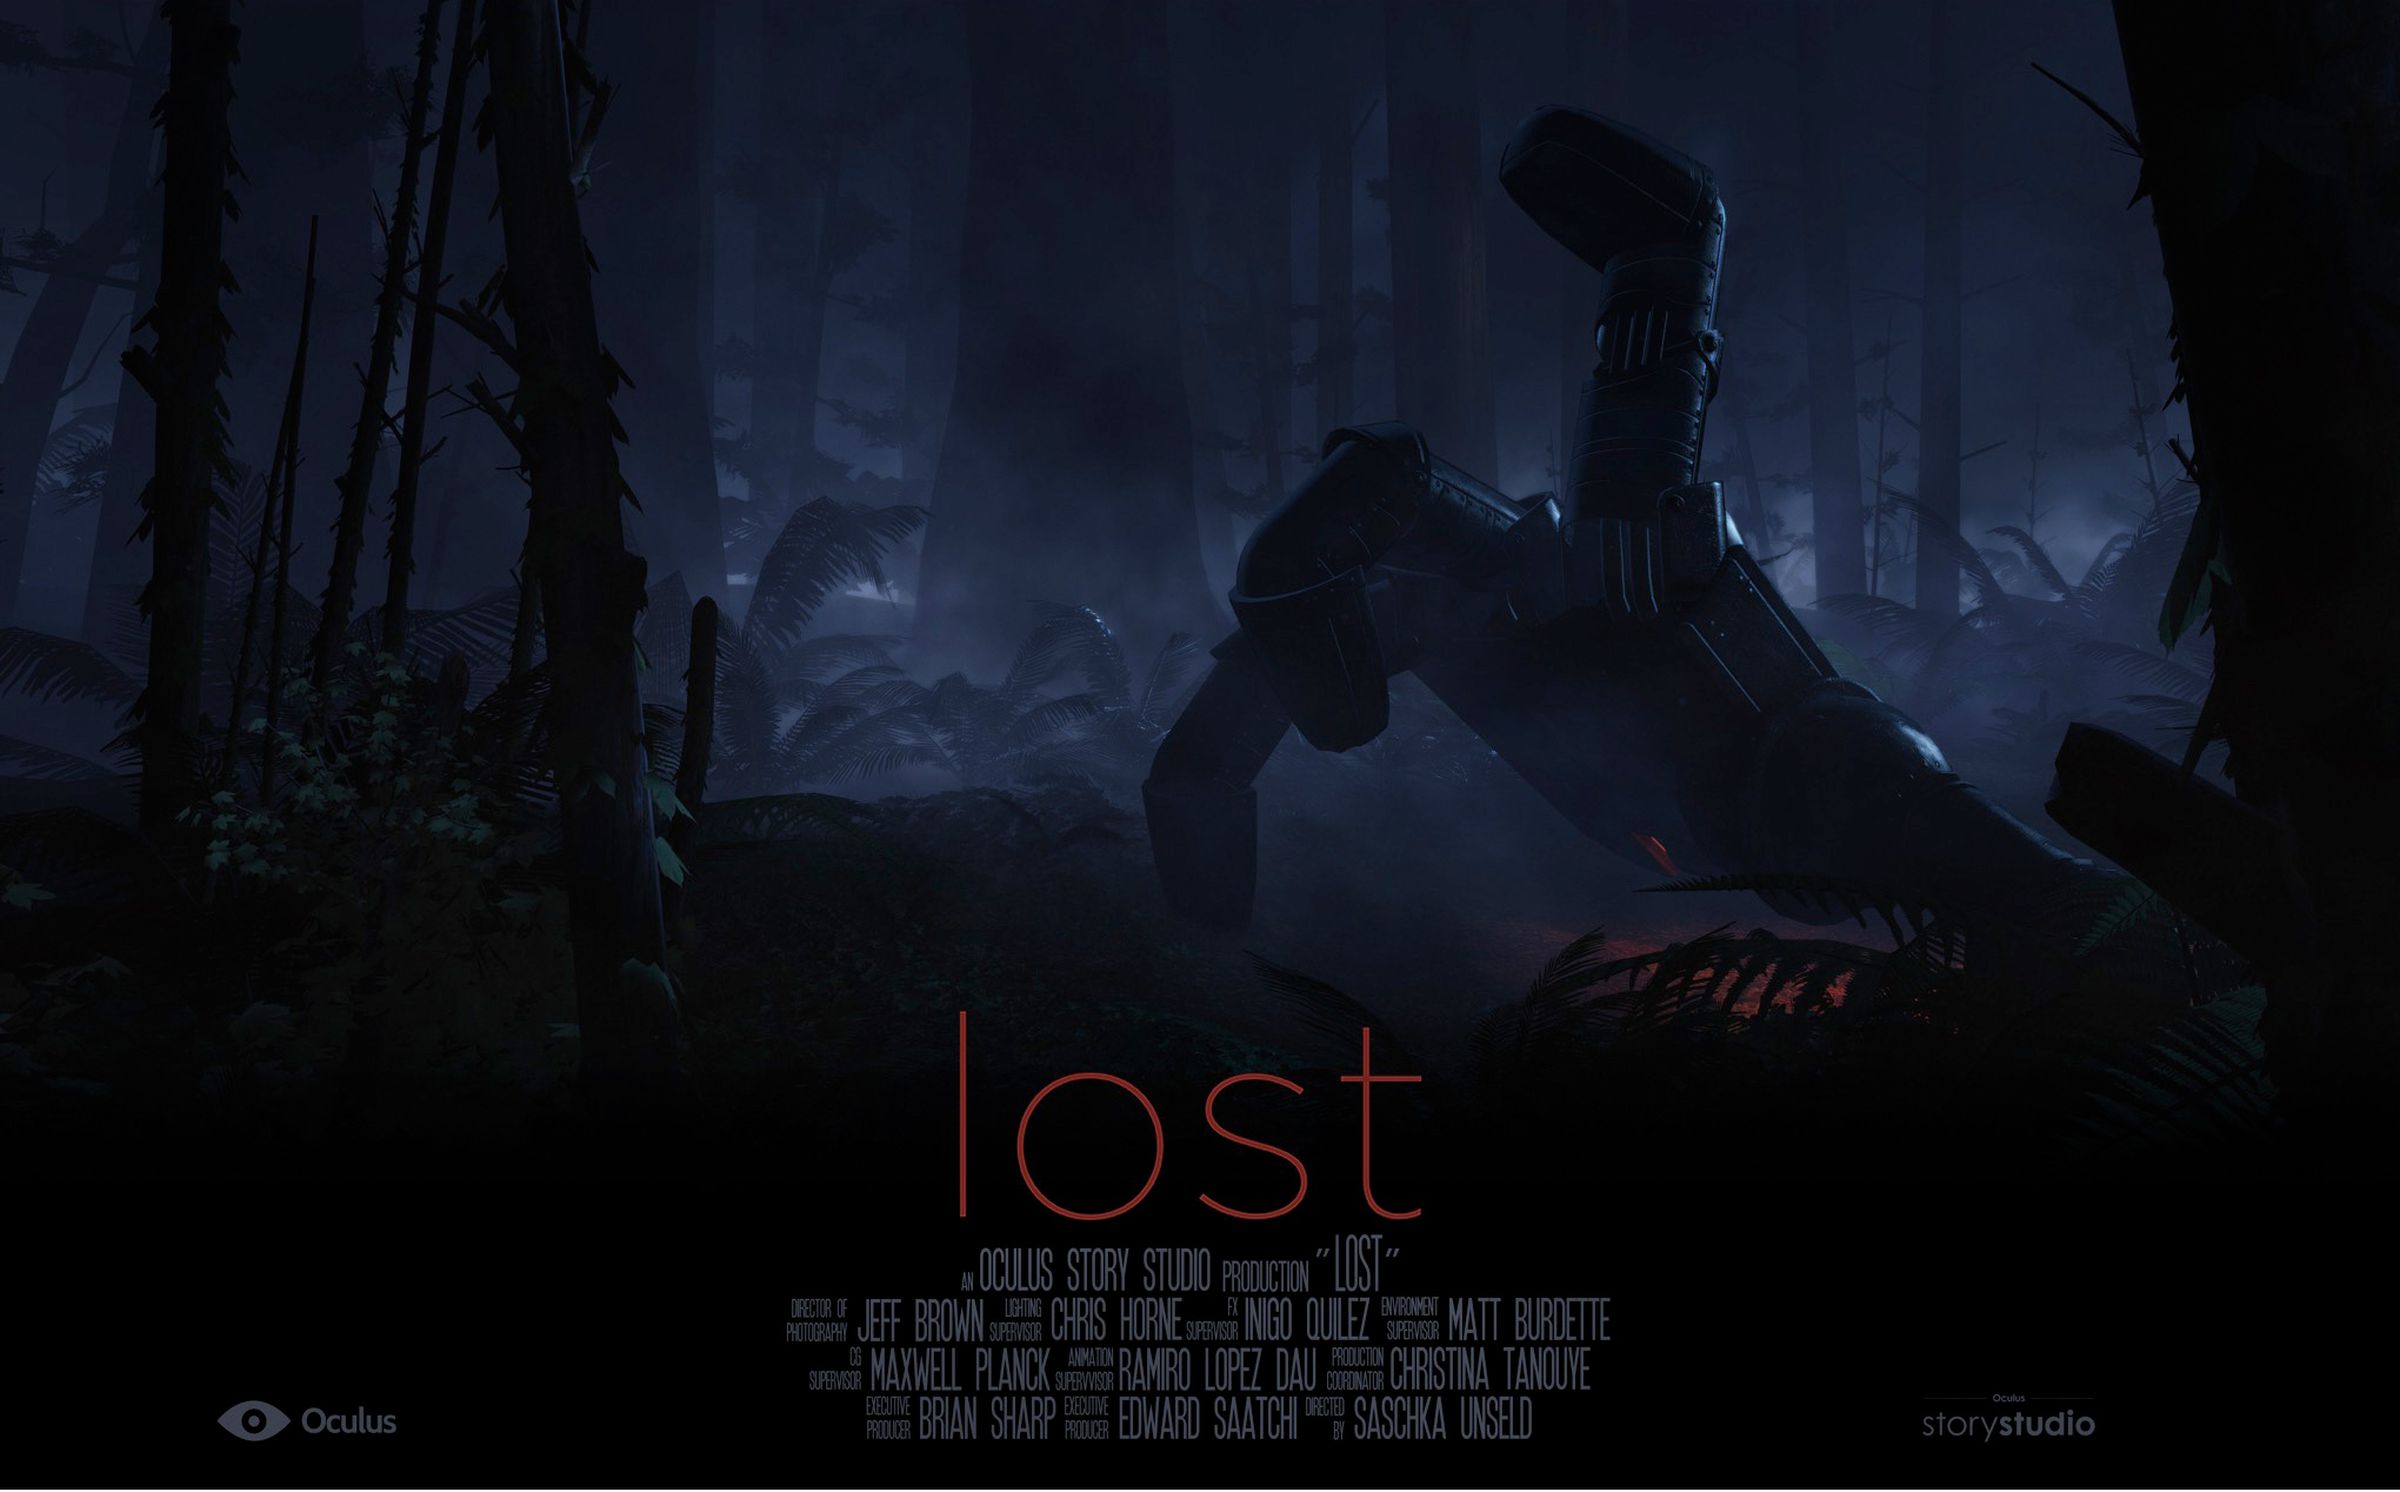 Lost Poster (OCULUS)